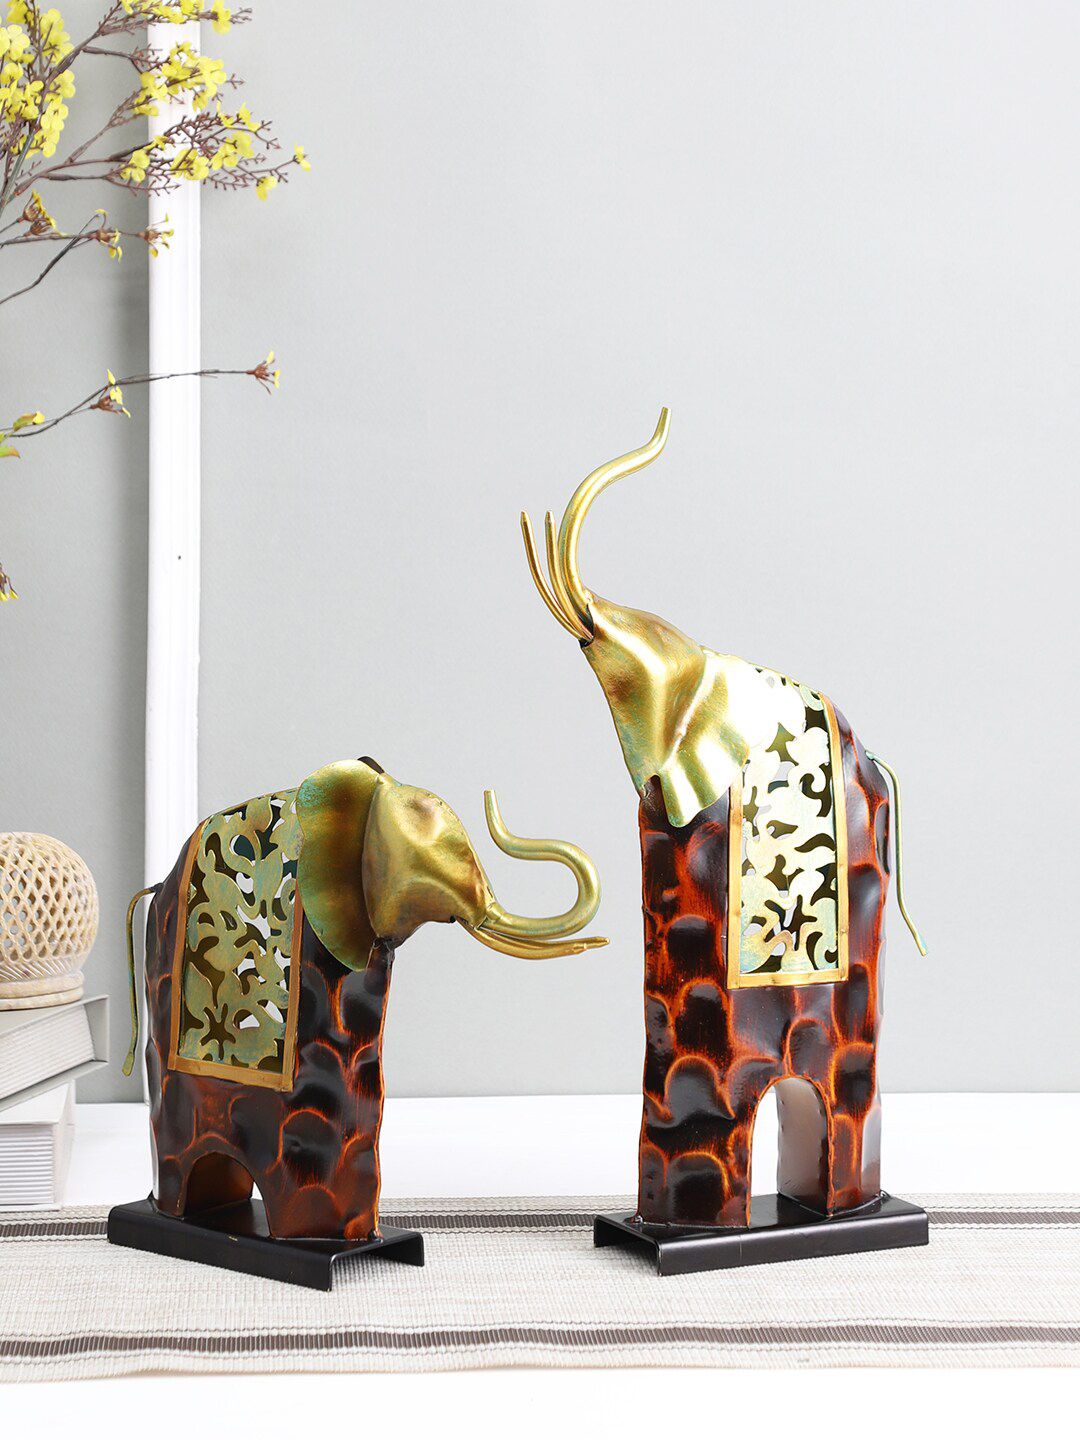 Aapno Rajasthan Set of 2 Red & Gold-Toned Attractive Elephant Table Decor Showpieces Price in India